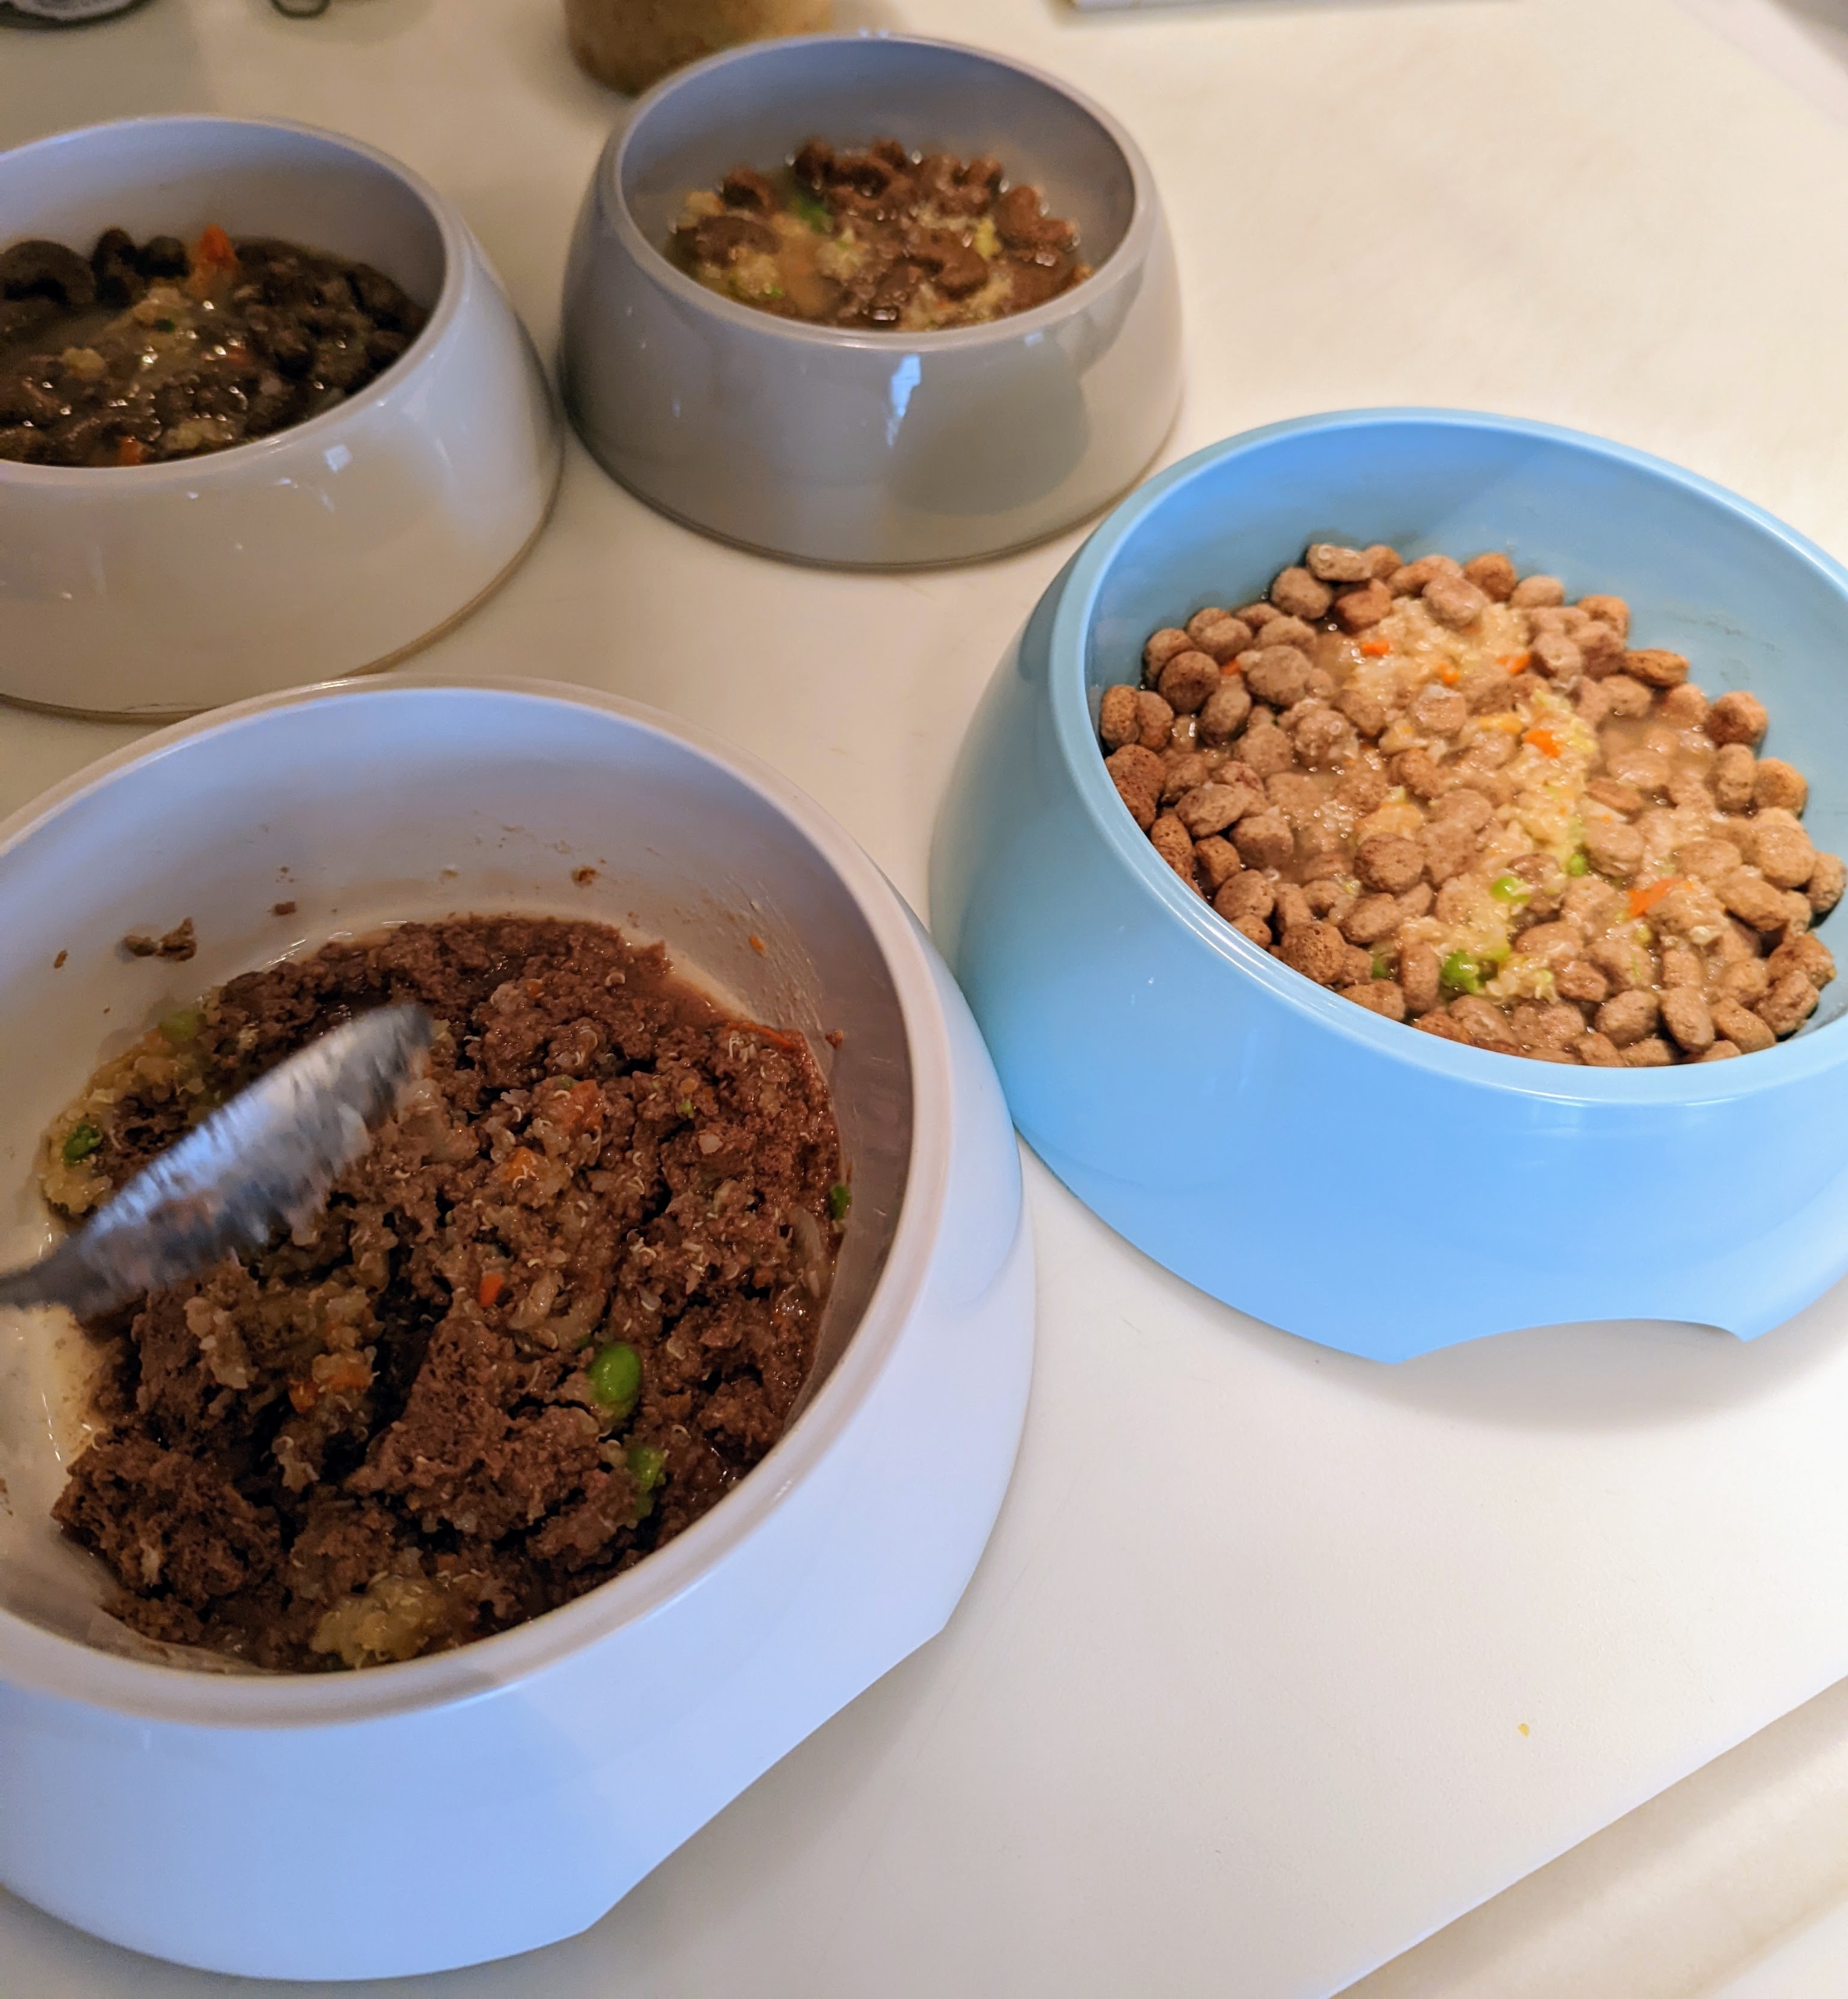 Making Delicious Food for My Dogs - The Martha Stewart Blog